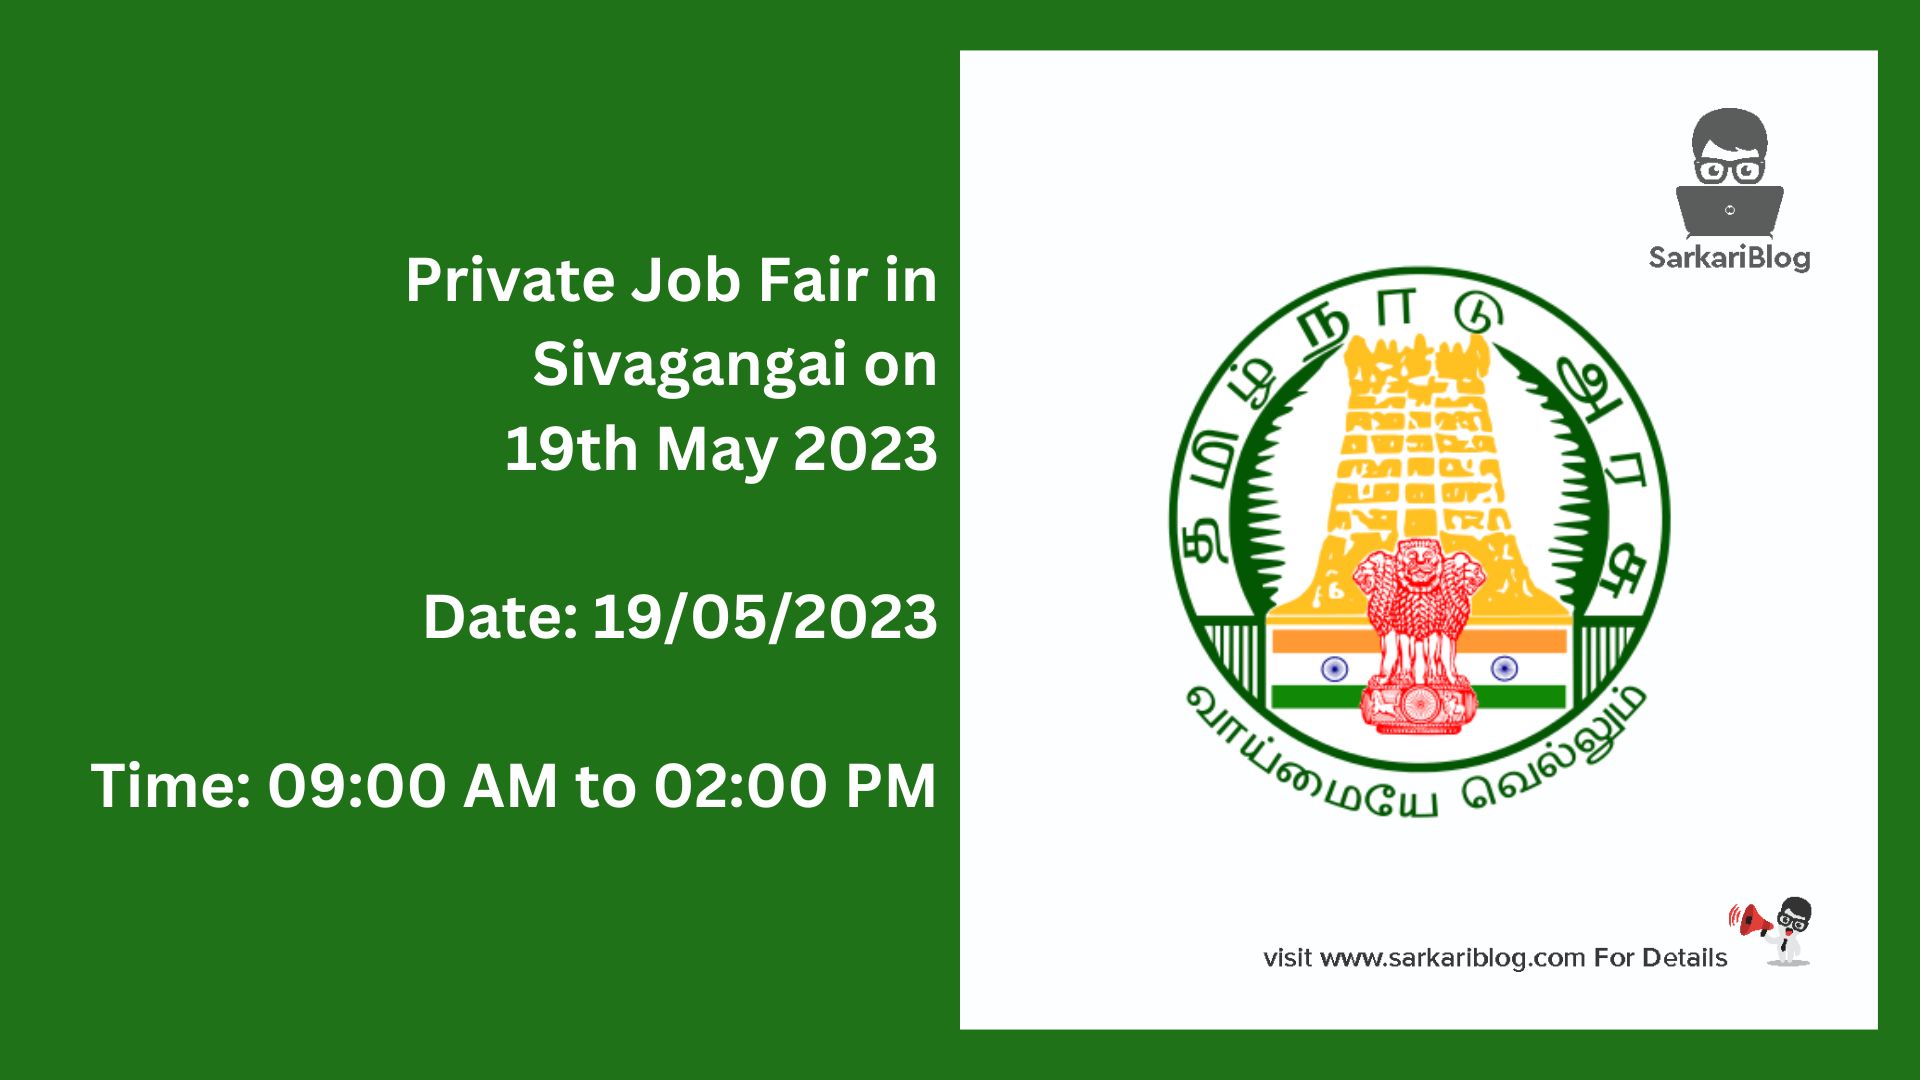 Private Job Fair in Sivagangai on 19th May 2023